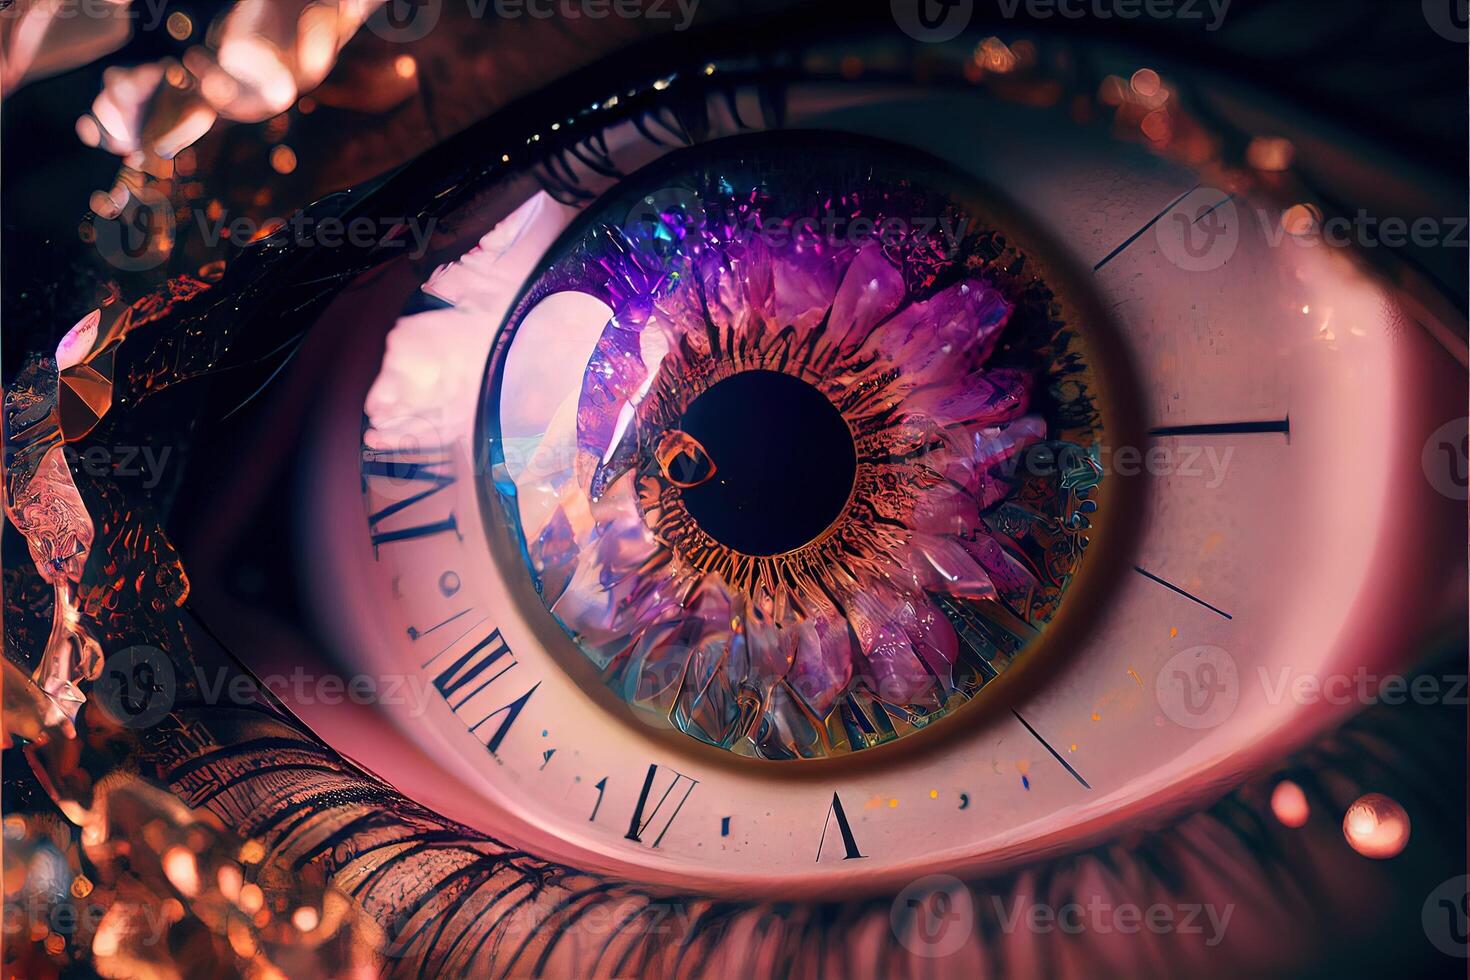 illustration of macro photography shot of realistic female eyes with pink Iris that looks like a Roman numeral analog clock, time in eyes, opalescence and shiny, shattered glass crystals photo